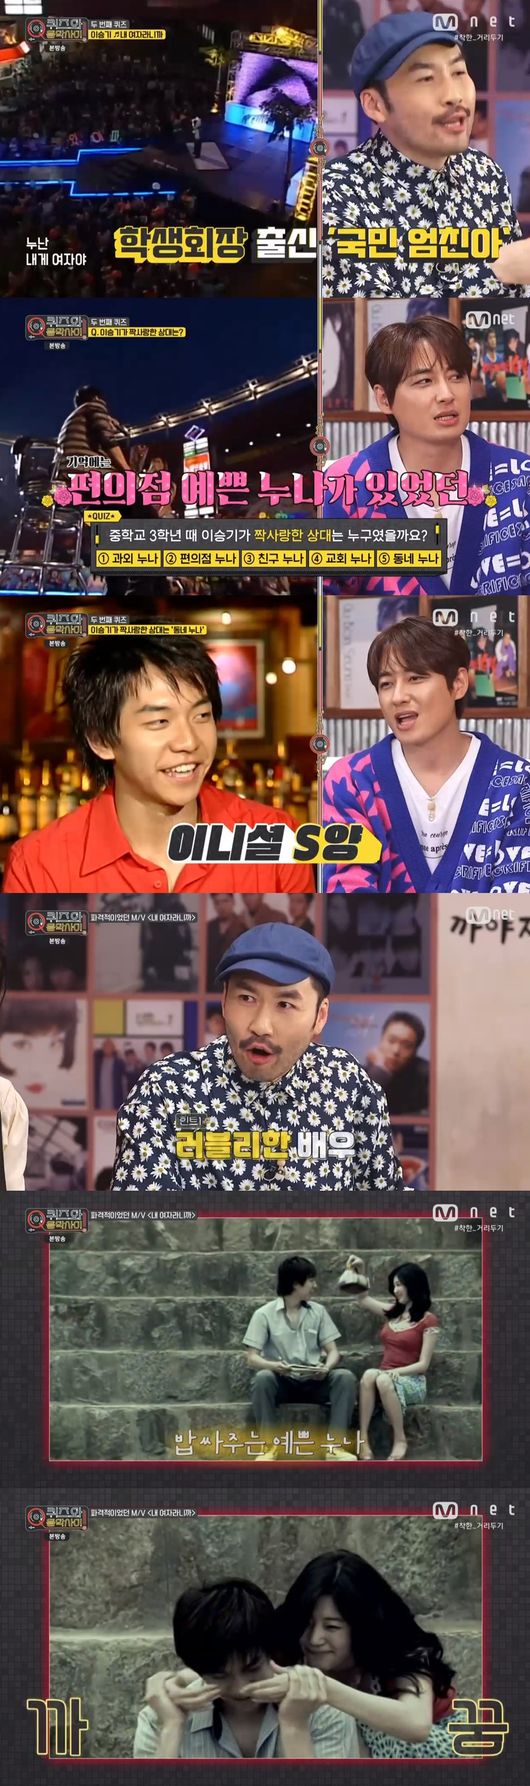 Lee Ji-hoon has appeared as the last guest between Queess and MusicOn Mnet Quiz and Music broadcast on the 2nd, Lee Ji-hoon appeared as the last guest, and Shin Ji showed tears.The first menu on the day was Cheong-myeon. If you answer the correct answer, you will eat spicy chewy noodles, and if you are wrong, you will eat hells taste chewy noodles.The first quiz featured Jang Na-ras Sweet Dream, which was to pick a celebrity with a different age than Jang Na-ra.But Jang Na-ra was the same age as Shin Ji and Kim Na-young.Shin Ji and Kim Na-young confidently said of the candidates, Baseball player Choo Shin-soo is younger than me.As a result, I ended up eating Noh Hong-chuls taste of hell.Noh Hong-chul said, I thought it would be very spicy but its too salty, making the surroundings Super fun.The second menu was Tea-su-yuk. The second quiz was Lee Seung-gis Its My Girl.Noh Hong-chul said, Ji Hoon is called Top Goal Lee Seung-gi these days. Shin Ji said, This song is a song written and composed by Psys brother.Shi Chongguis quiz was to hit a partner Lee Seung-gi, a junior high school senior, had a crush on.Shin Ji found a cross necklace in Lee Seung-gis video and shouted like a church sister; thus the other members decided that they were also church sisters.But the members who tasted sweet and sour pork were surprised: the correct answer was the local Sister. Lee Seung-gi, in the past broadcast, loved local Sisters.Its S-shaped, she said, drawing attention by revealing her initials.Noh Hong-chul said, My friends also looked for who the S-shaped was. There was a very famous actor in Lee Seung-gis music video.The members admired Kim Sa-rang in the music video My Girl.Lee Ji-hoon said, I was so good that I spread it, about the nickname Topgol Lee Seung-gi.Lee Ji-hoon said, It is similar that the victory and I were debuting or ballad singers. There are many similar things, but the victory is smart and different from me.Lee Ji-hoon told the past story, When I was a high school student, my family was not good.It was not an environment where I could study, he said. I went to Goshi One with 100 days left for the SAT and studied until dawn and made a schedule the next day. Lee Ji-hoon said, But there was no significant difference in grades before and after Goshi One.The last Shi Chonggui quiz on the day was the song One Become with 60 of the best singers of the time in 1999.The quiz was to listen to the second verse and hit Singer, who did not sing the second verse; Lee Ji-hoon checked the correct answer, listening calmly to each person.But everyone Lee Ji-hoon checked in and made the Super fun around me.Eventually, he asked to listen to one more song: Lee Ji-hoon didnt judge exactly until he heard it one more time.Lee Ji-hoon said, H.O.T. seems to have given me one more verse, because he is a senior; the hit called two verses. He was convinced that the answer was myth.Shin Ji recalled that Choi Jun-young wrote a song for coyotes, so we did it together. Lee Ji-hoons performance made the members enjoy the ceremony.It was a time to be so happy and healed for me, said Kim Na-young, who made the final broadcast of Between Quiz and Music on the day. Shin Ji showed tears.I was so happy to see Sister, my brothers I wanted to see, said Lee, who said, I was so happy to be here.Besides, my arm is sick now, and I am so grateful that all the steps are tailored to me. Mnet Between Quiz and Music broadcast capture